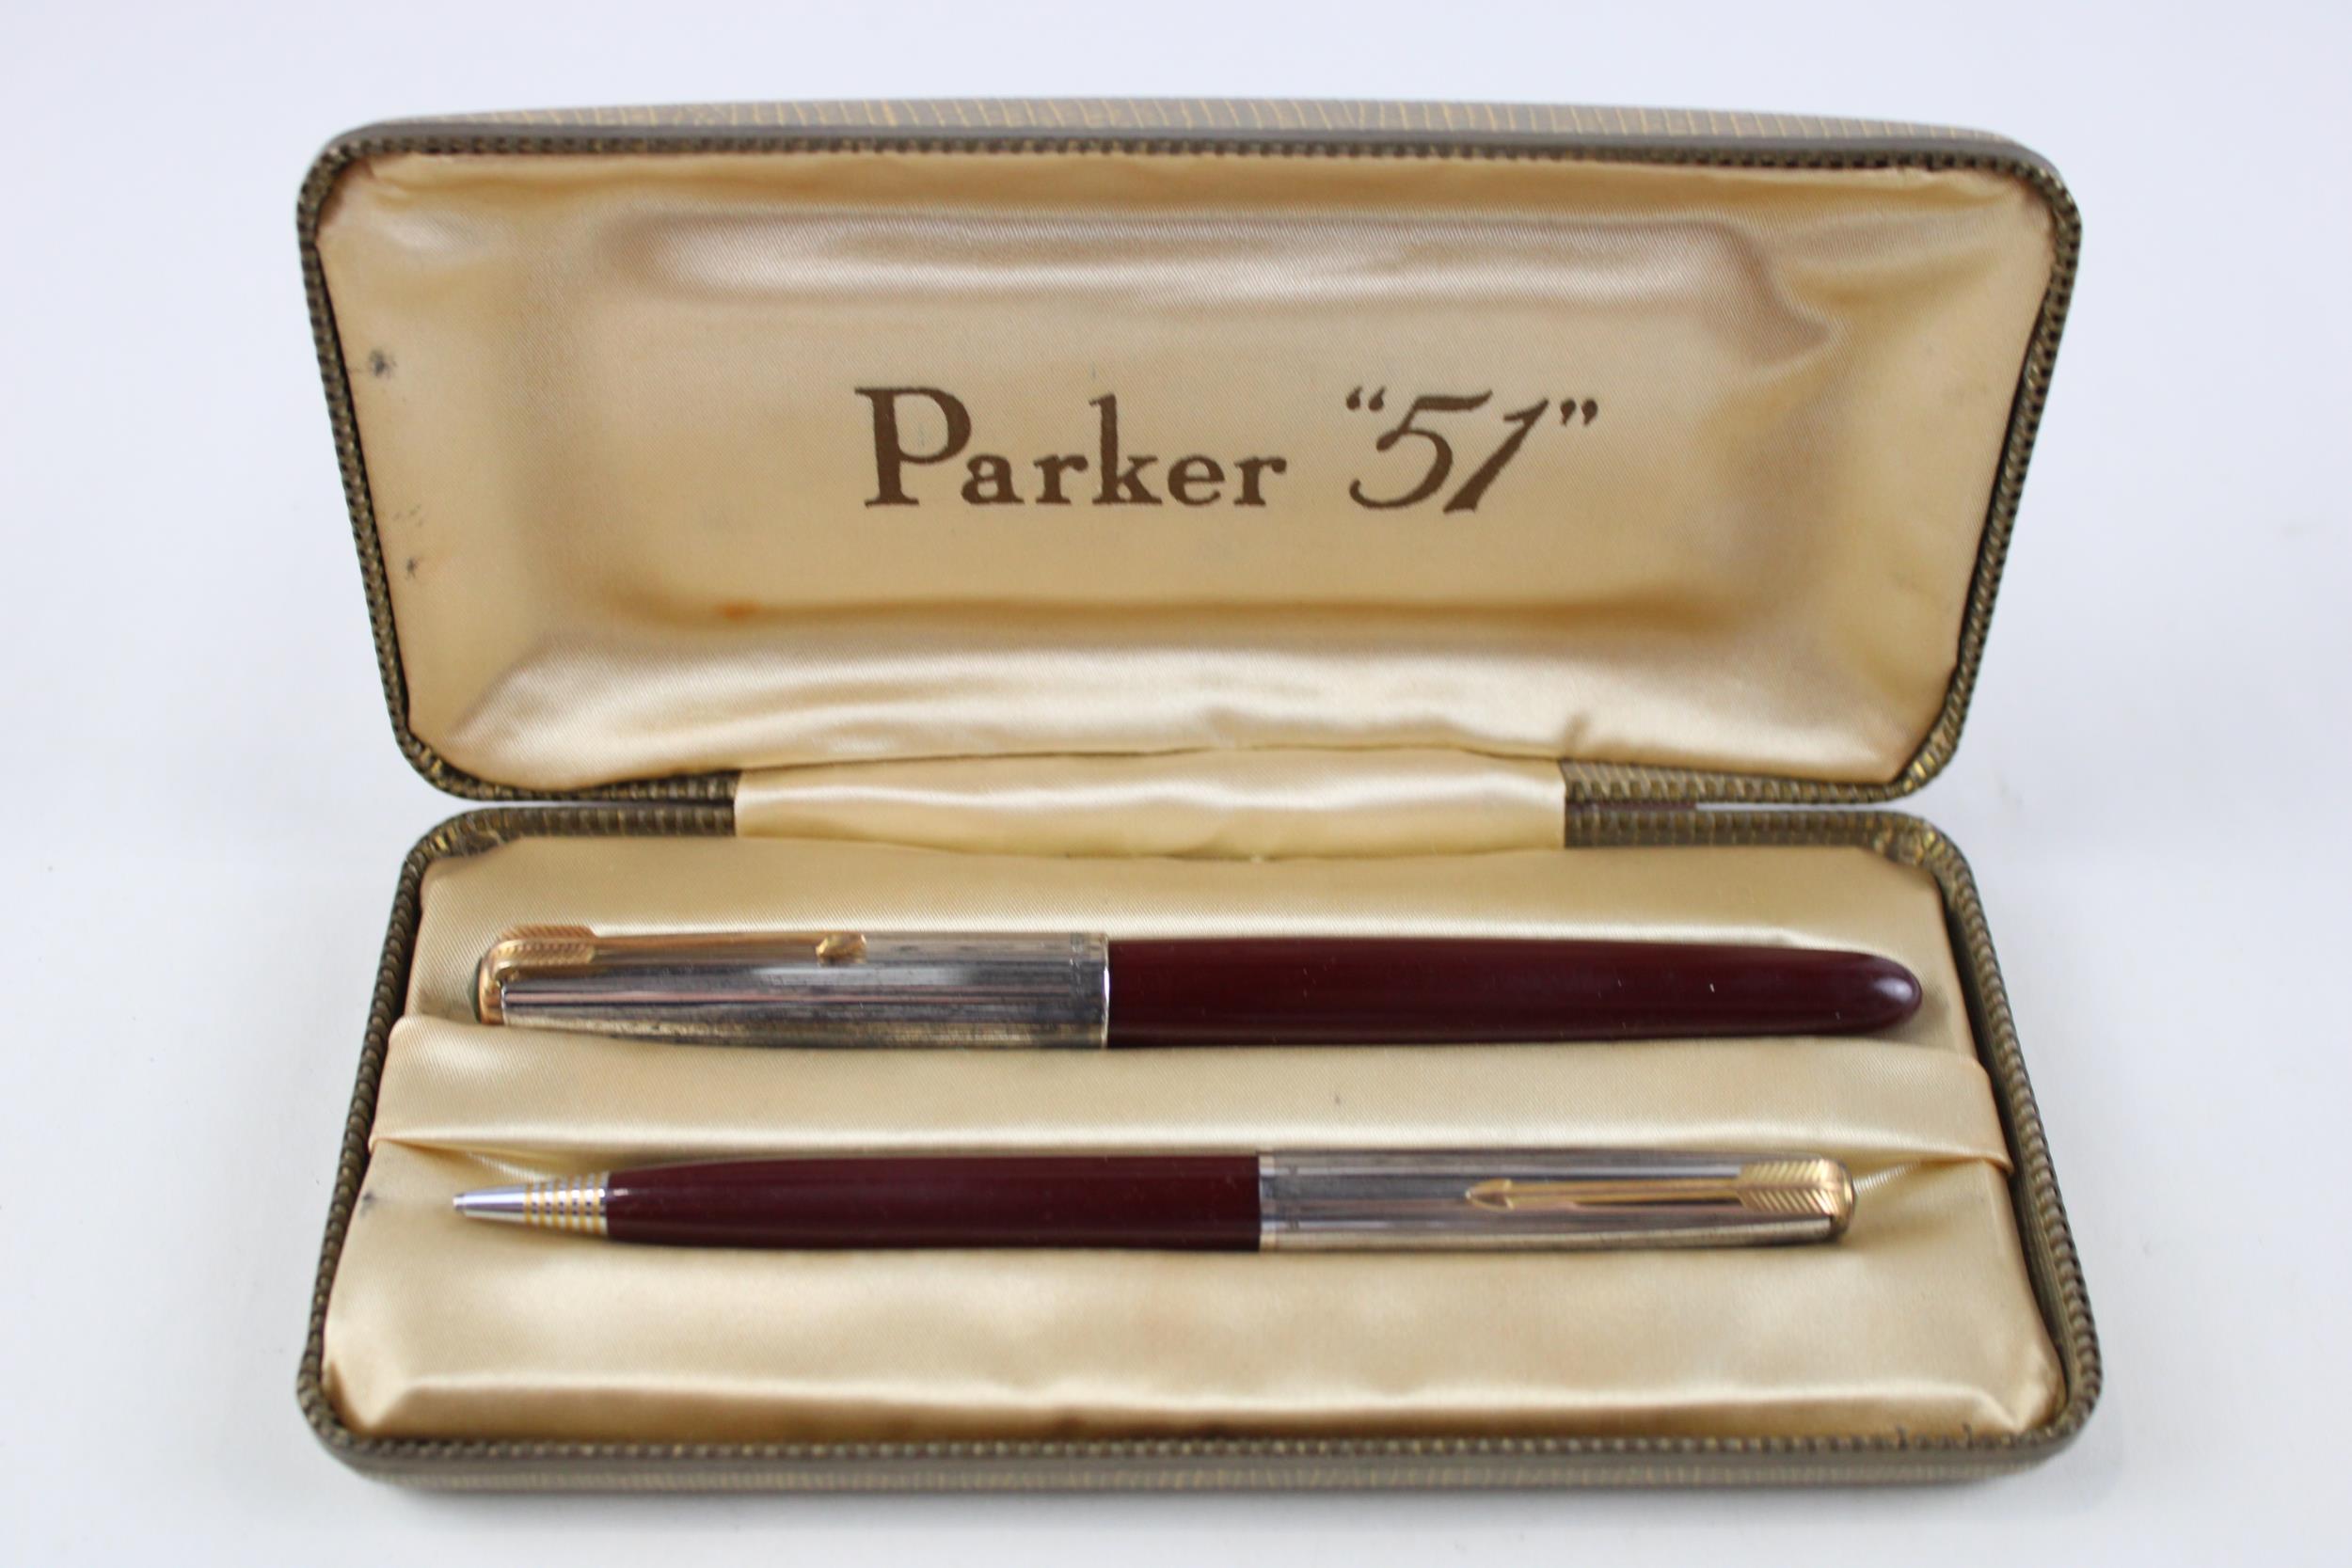 Vintage PARKER 51 Burgundy Fountain Pen w/ 14ct Gold Nib, Rolled Silver Cap, Box - w/ Matching